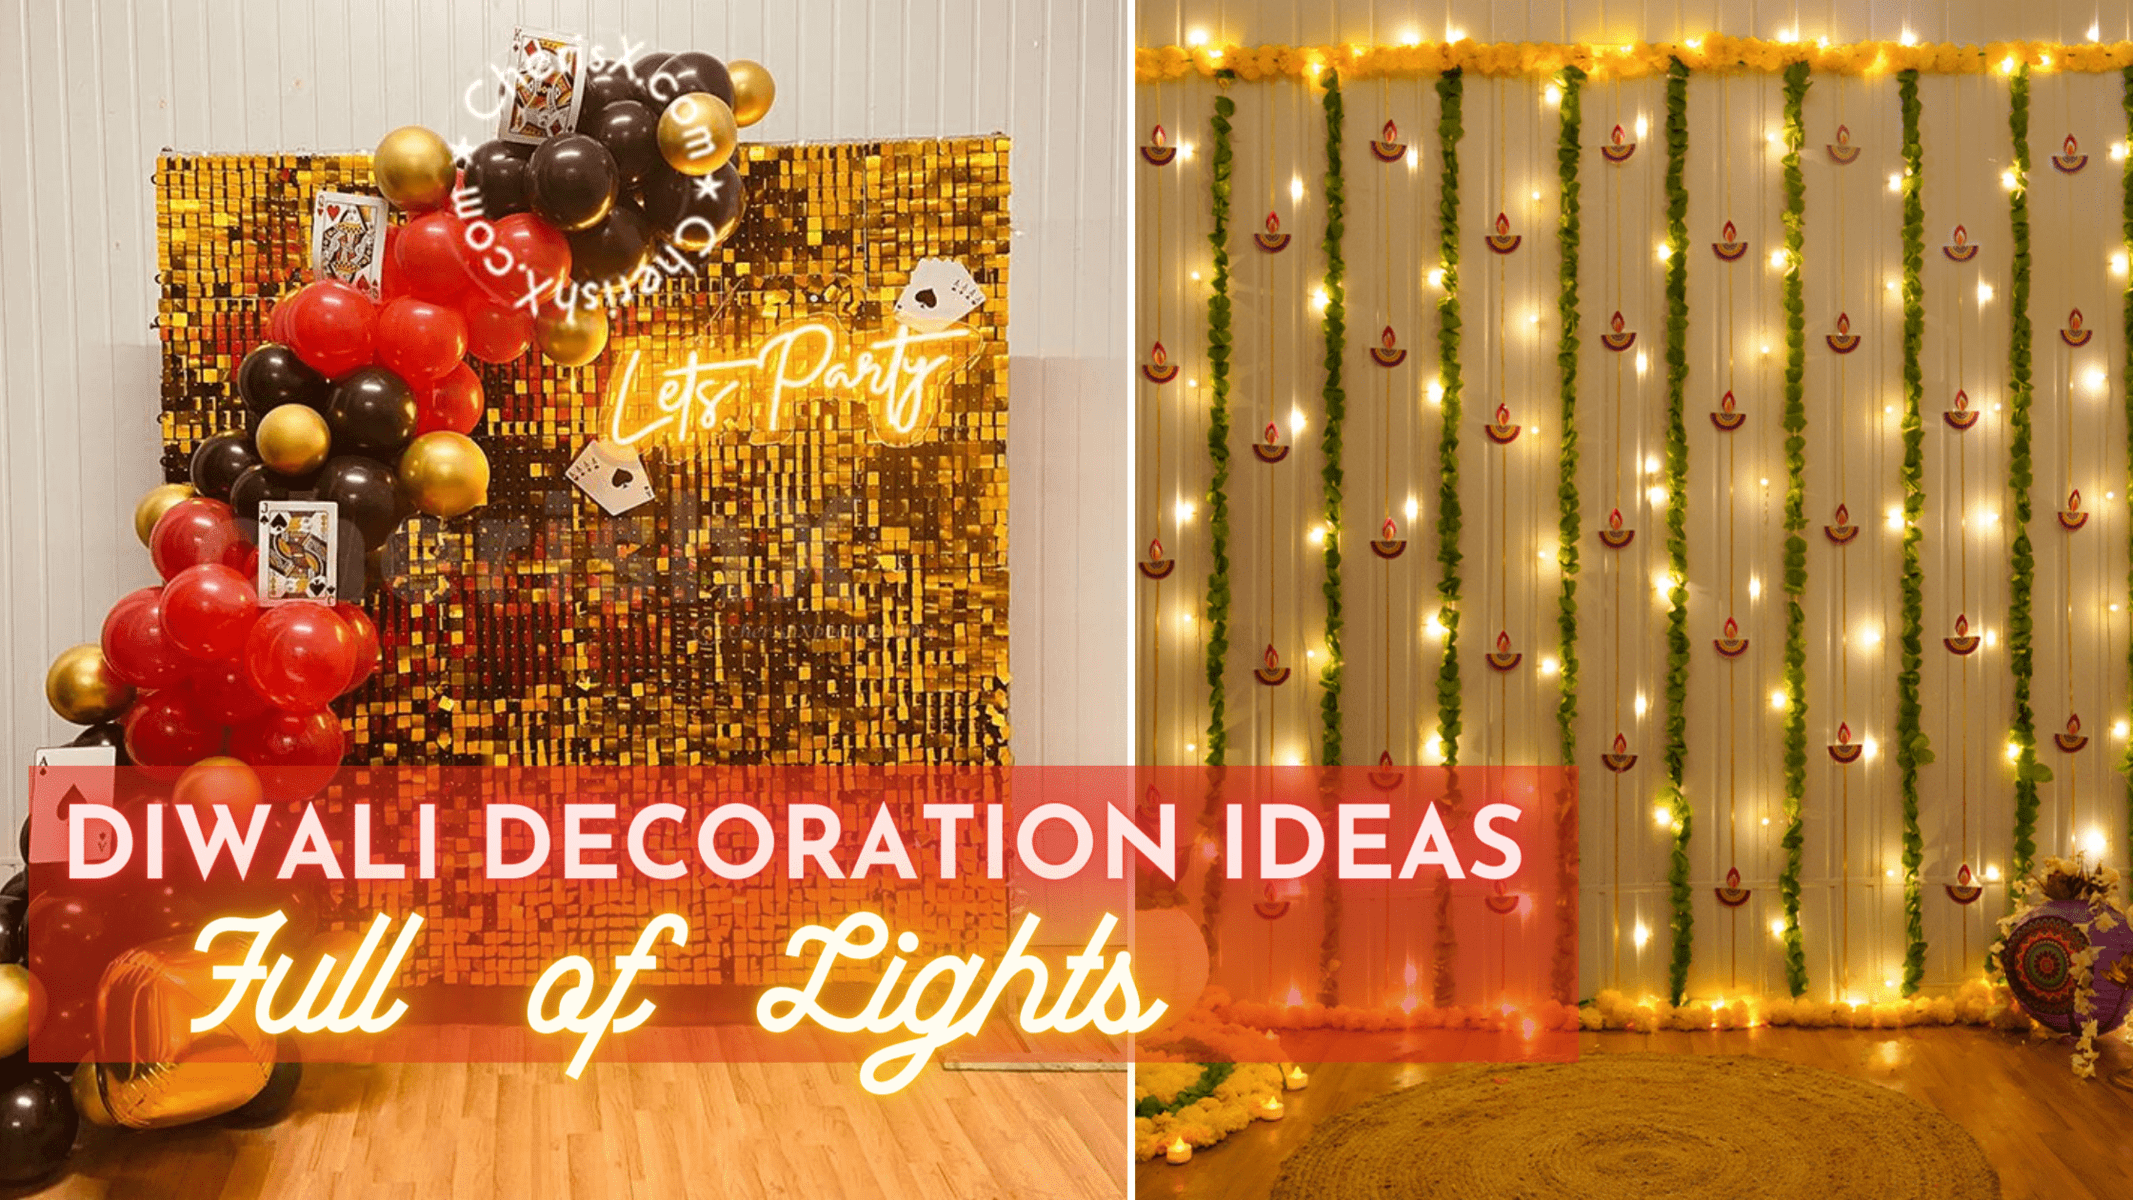 Diwali Decoration Ideas Full of Lights- Home Party Celebrations